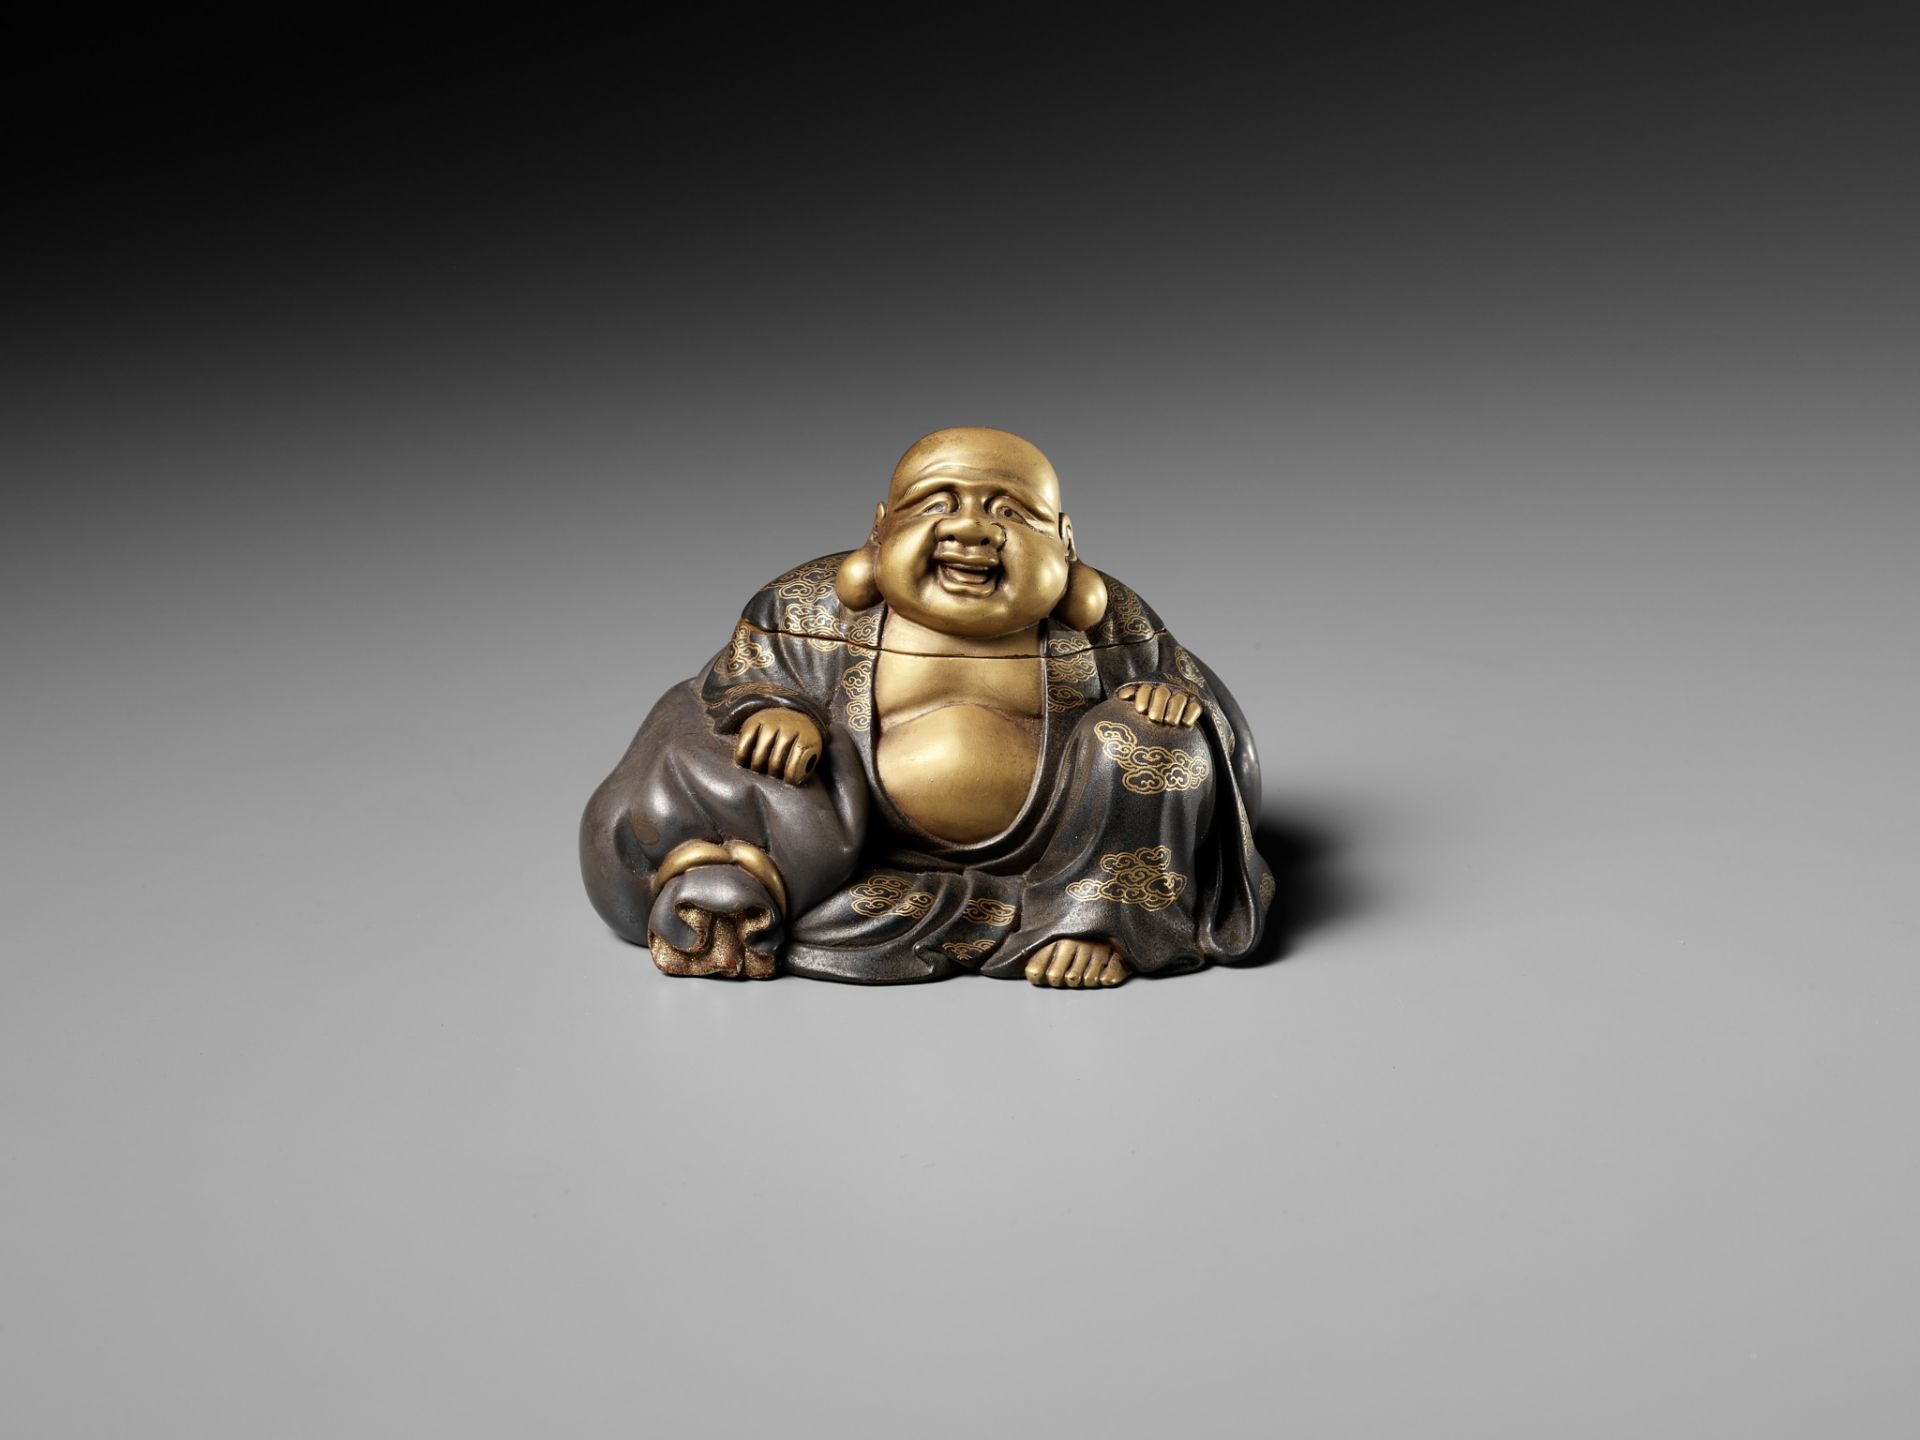 A FINE LACQUER KOGO (INCENSE BOX) AND COVER IN THE FORM OF HOTEI - Image 3 of 9